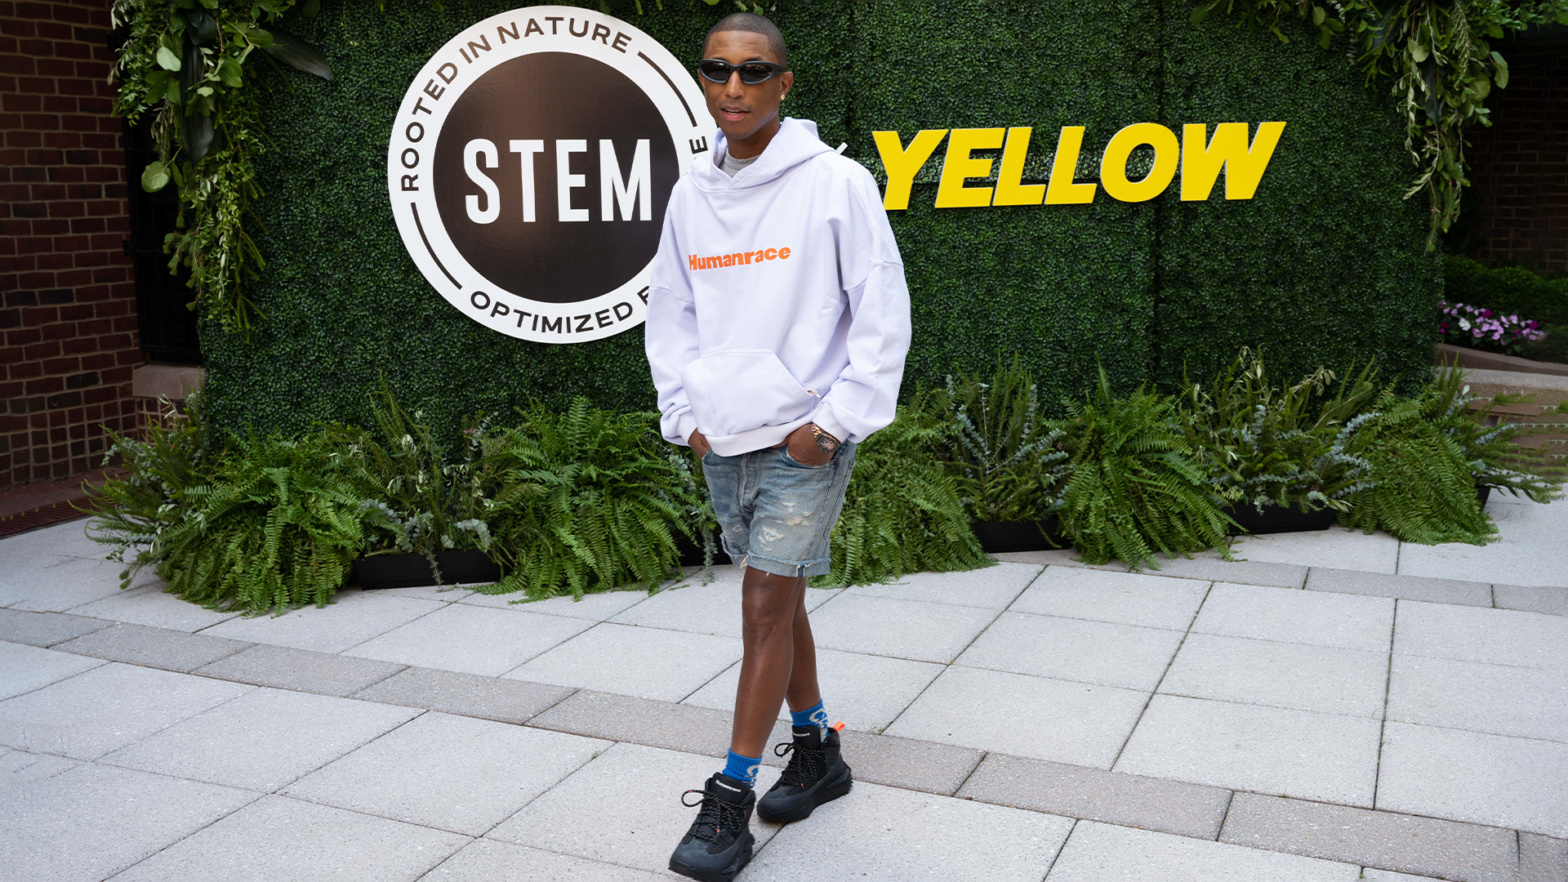 Pharrell Williams' YELLOW And STEM Partner To Help Expose Science And Nature Education To Kids With $1M Contribution